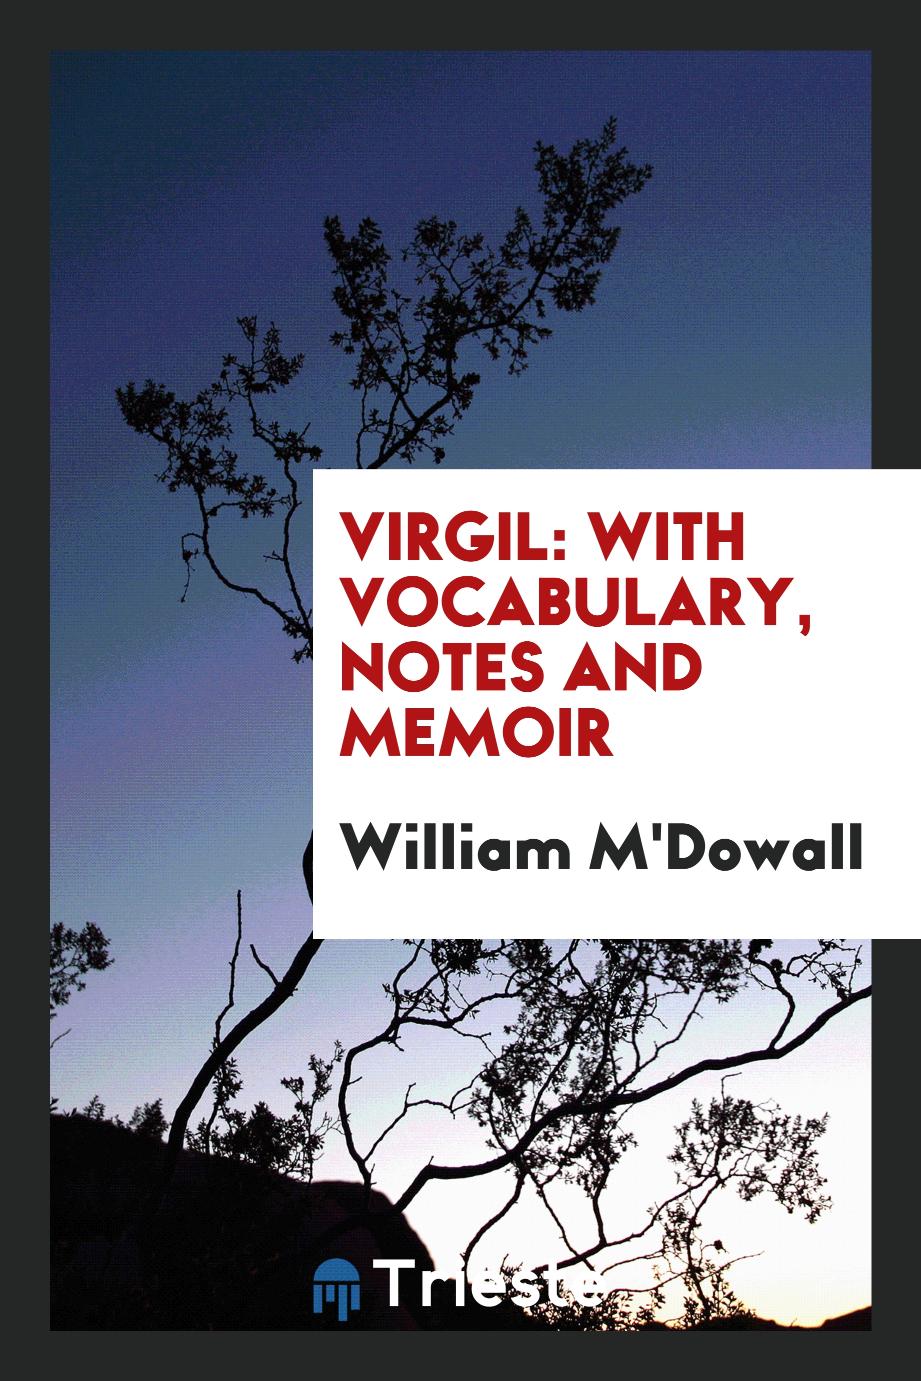 Virgil: With Vocabulary, Notes and Memoir